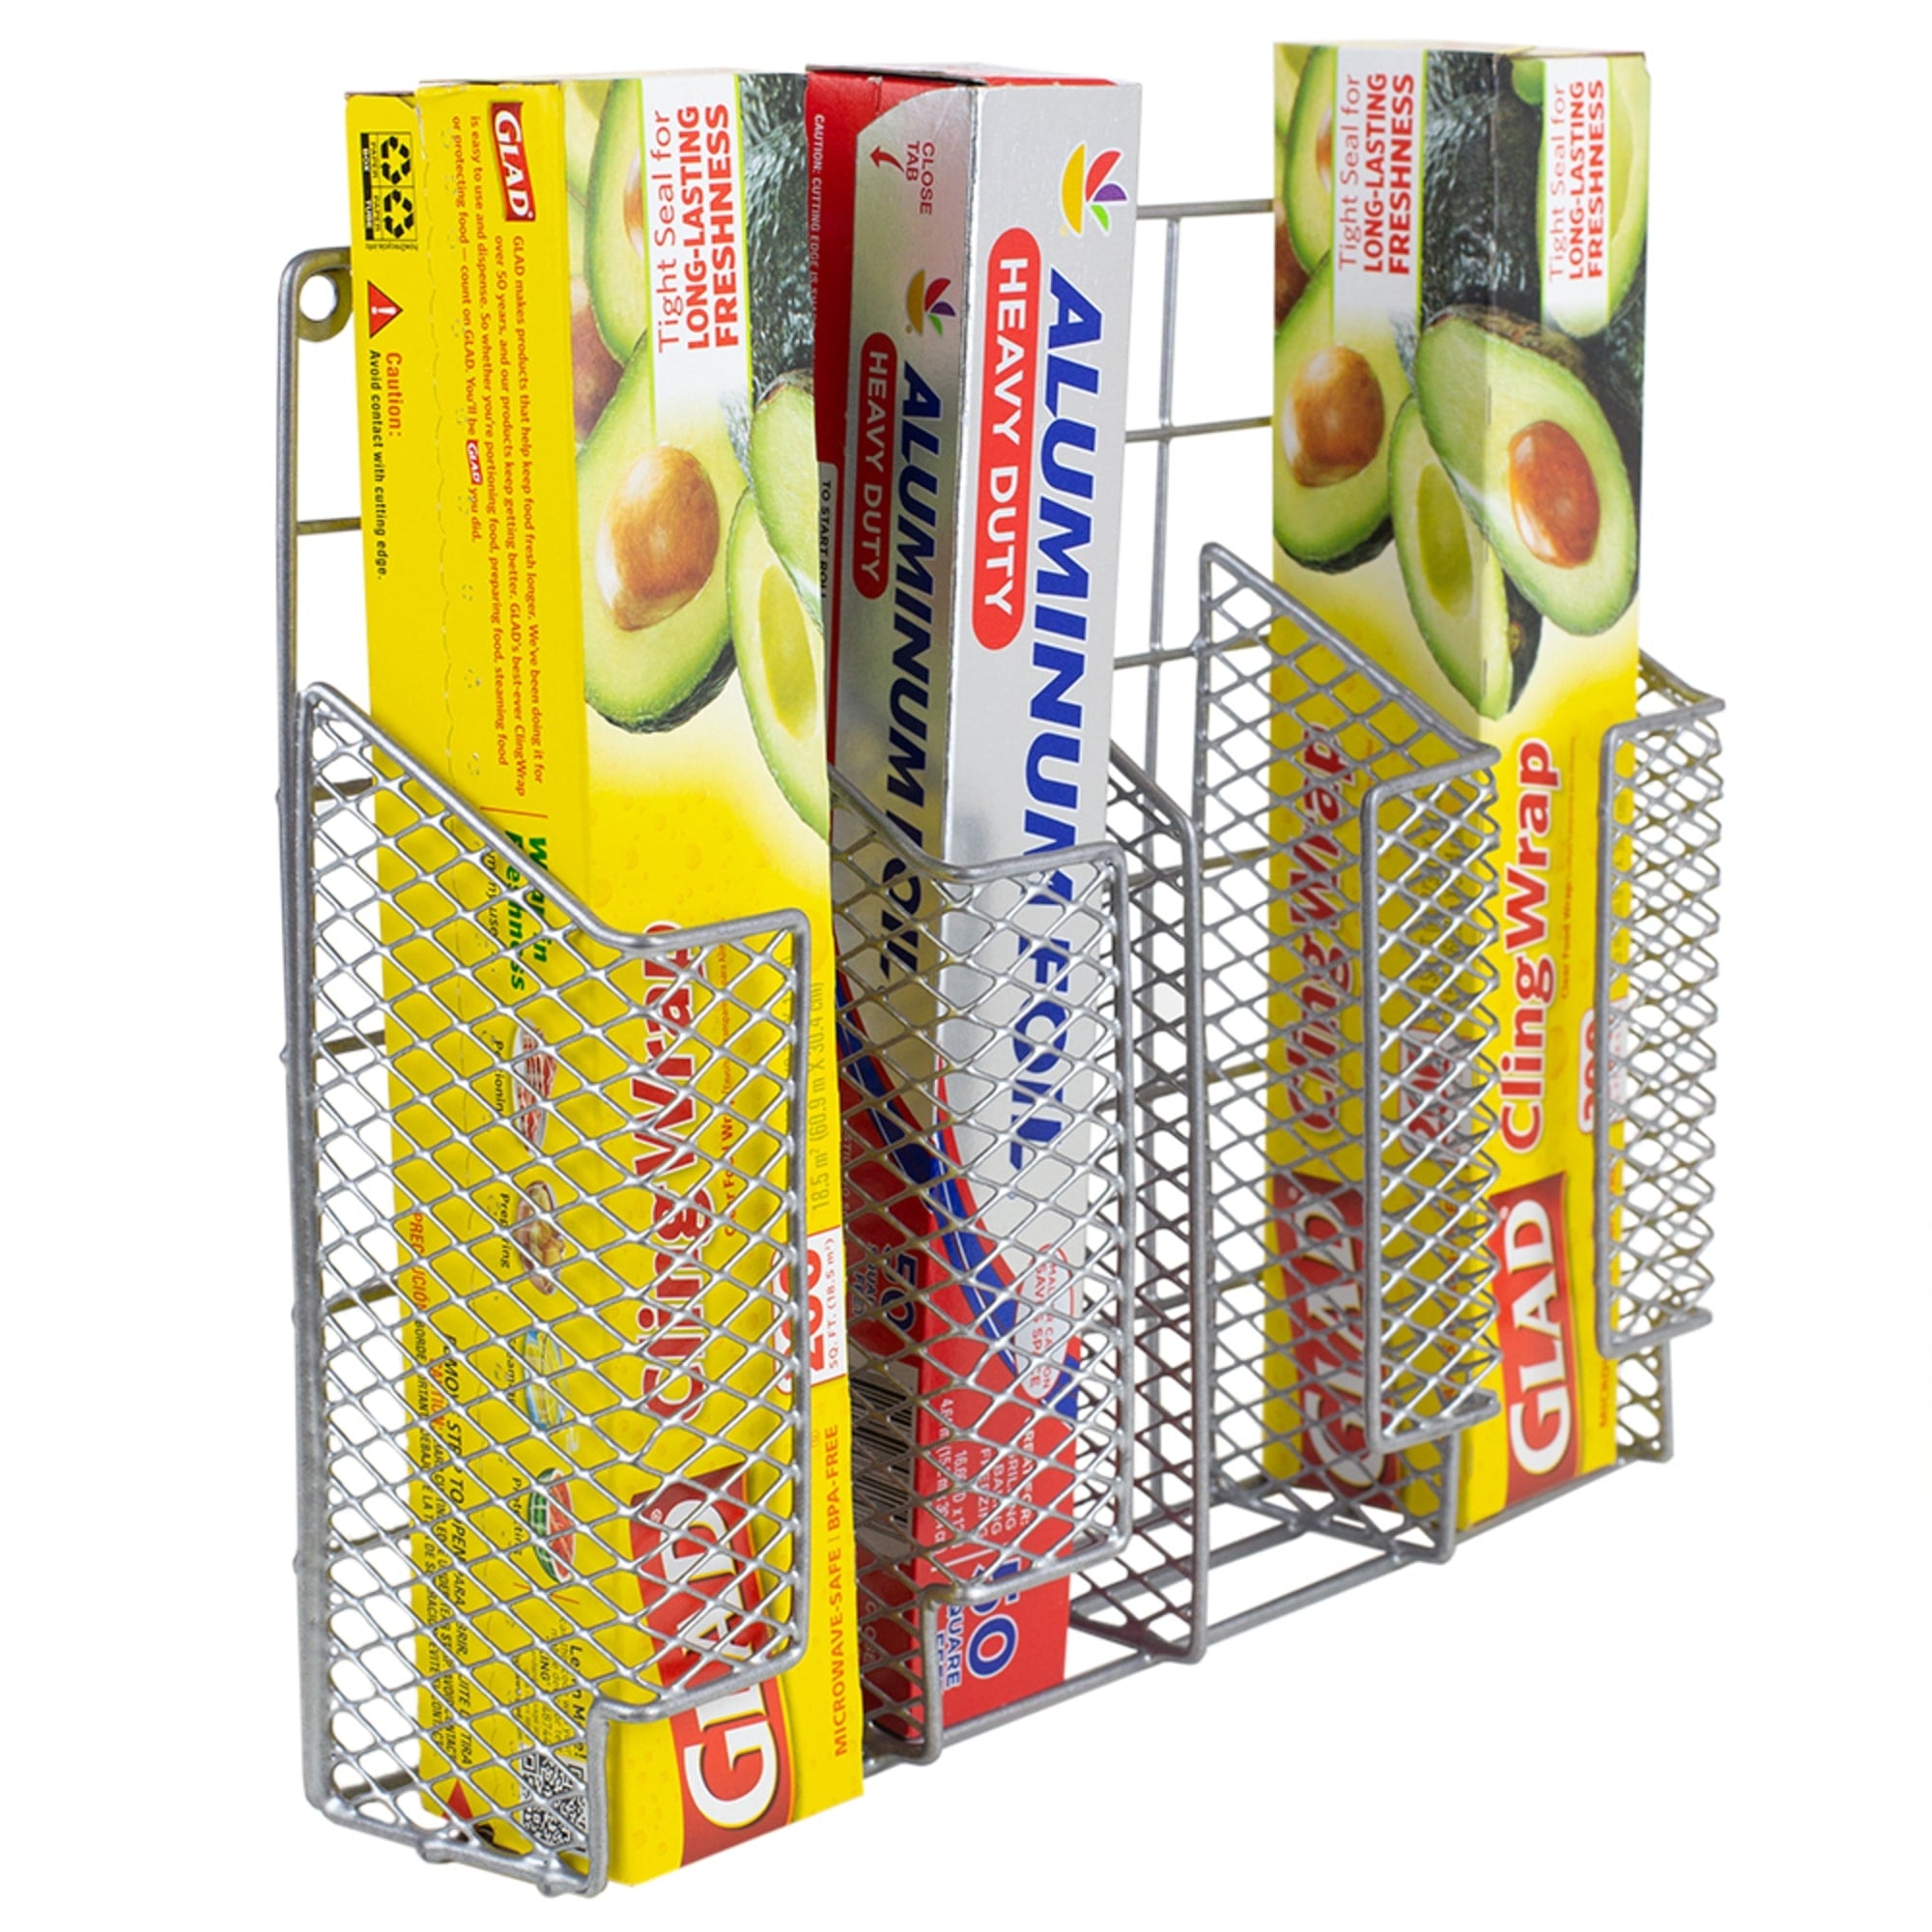 Home Basics Over the Cabinet Vinyl Coated Steel Wrap Organizer, Silver $8.00 EACH, CASE PACK OF 6